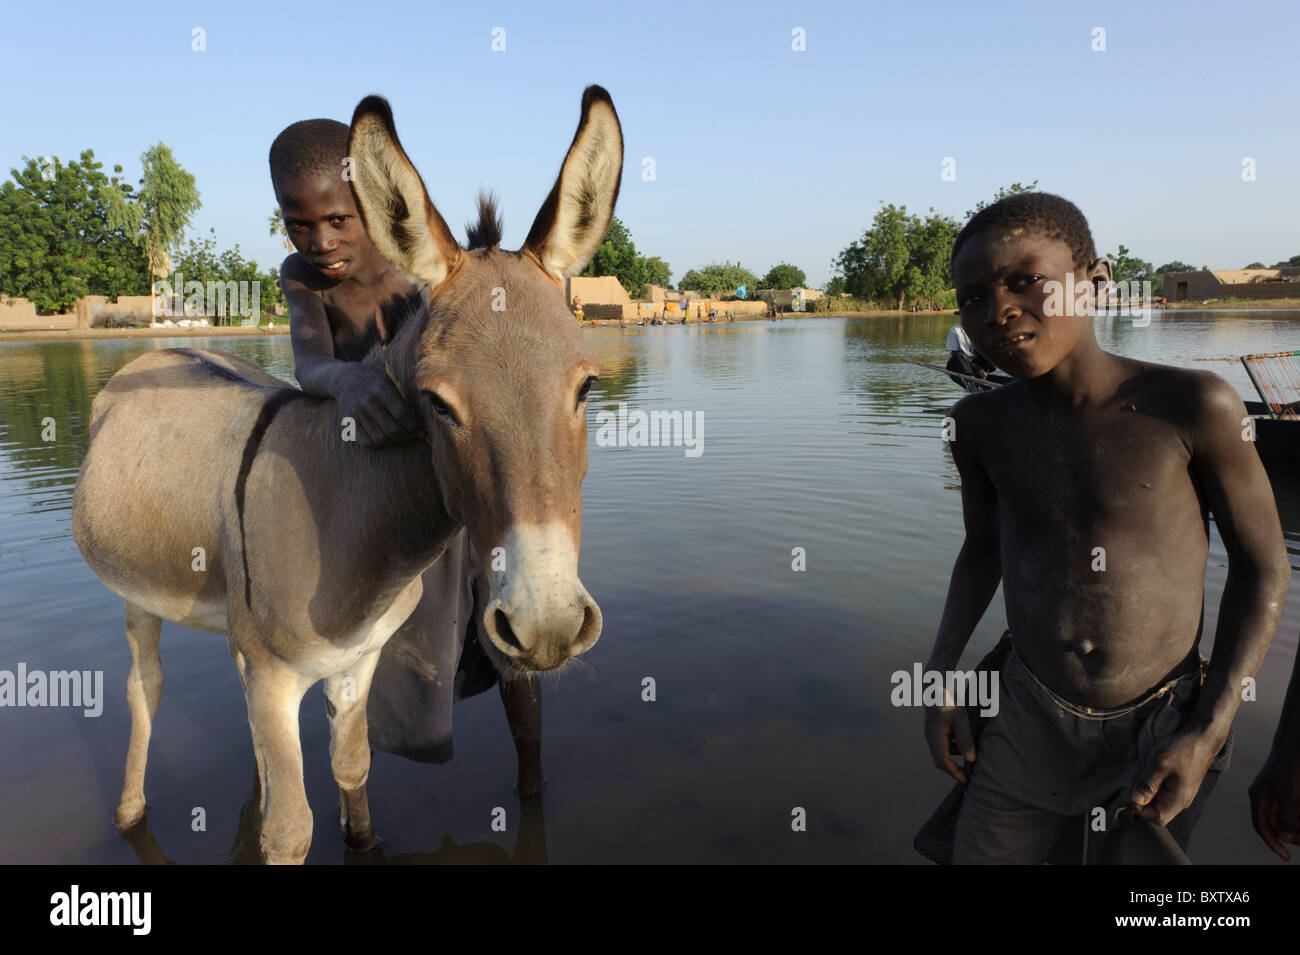 Young boys and donkey standing in the water of the Bani River near Djenné, Mali Stock Photo